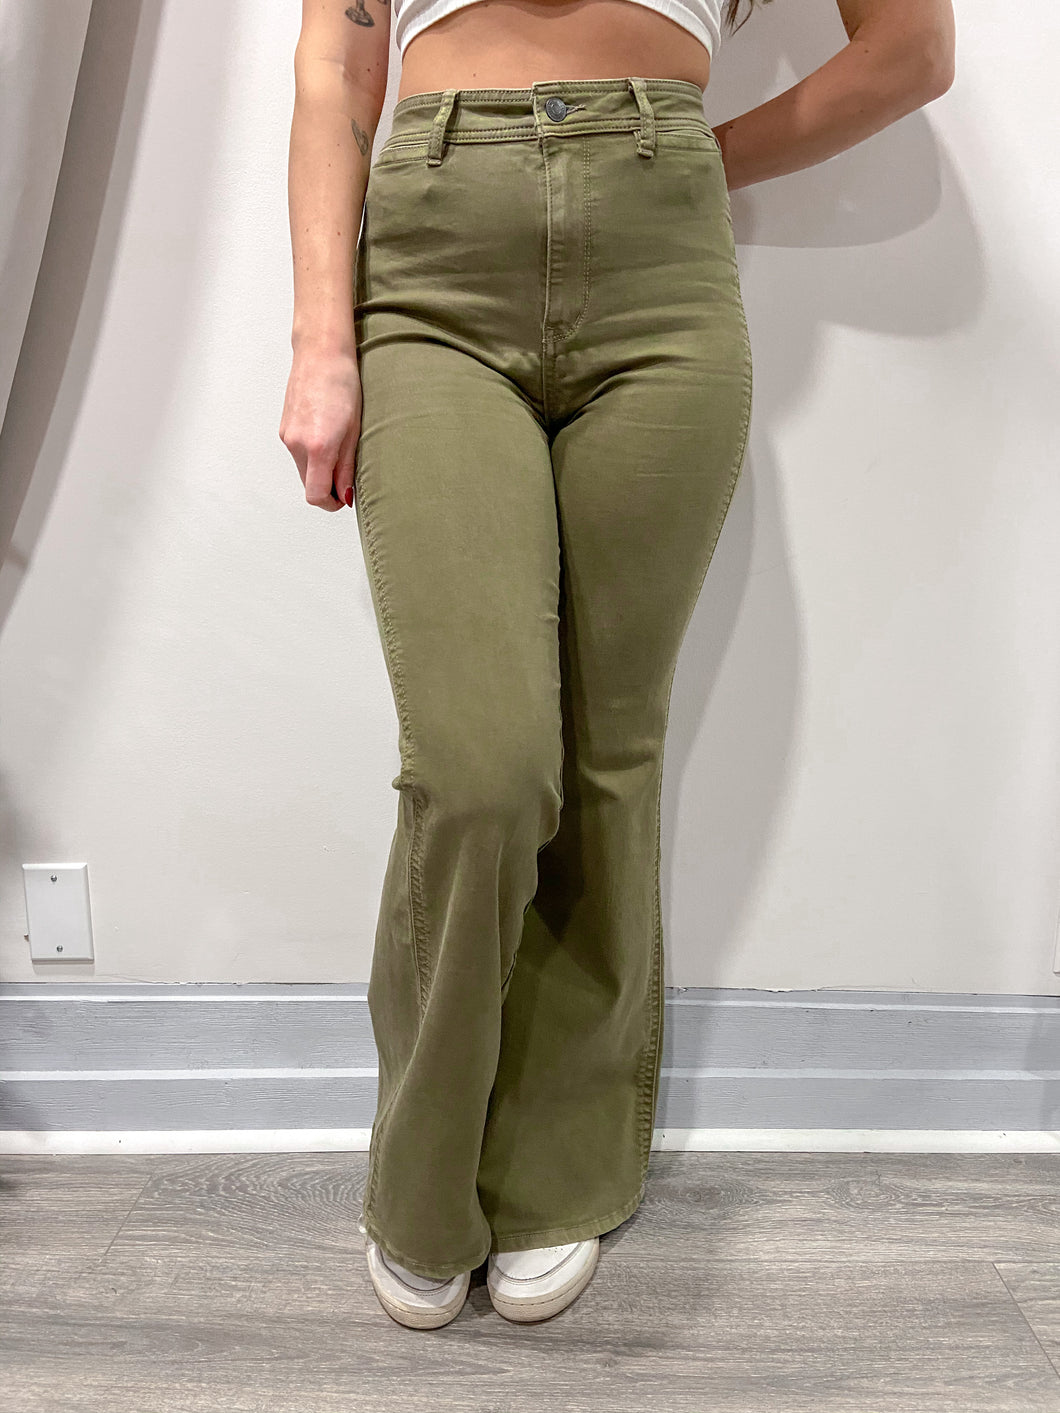 Free People Olive Flare Jeans